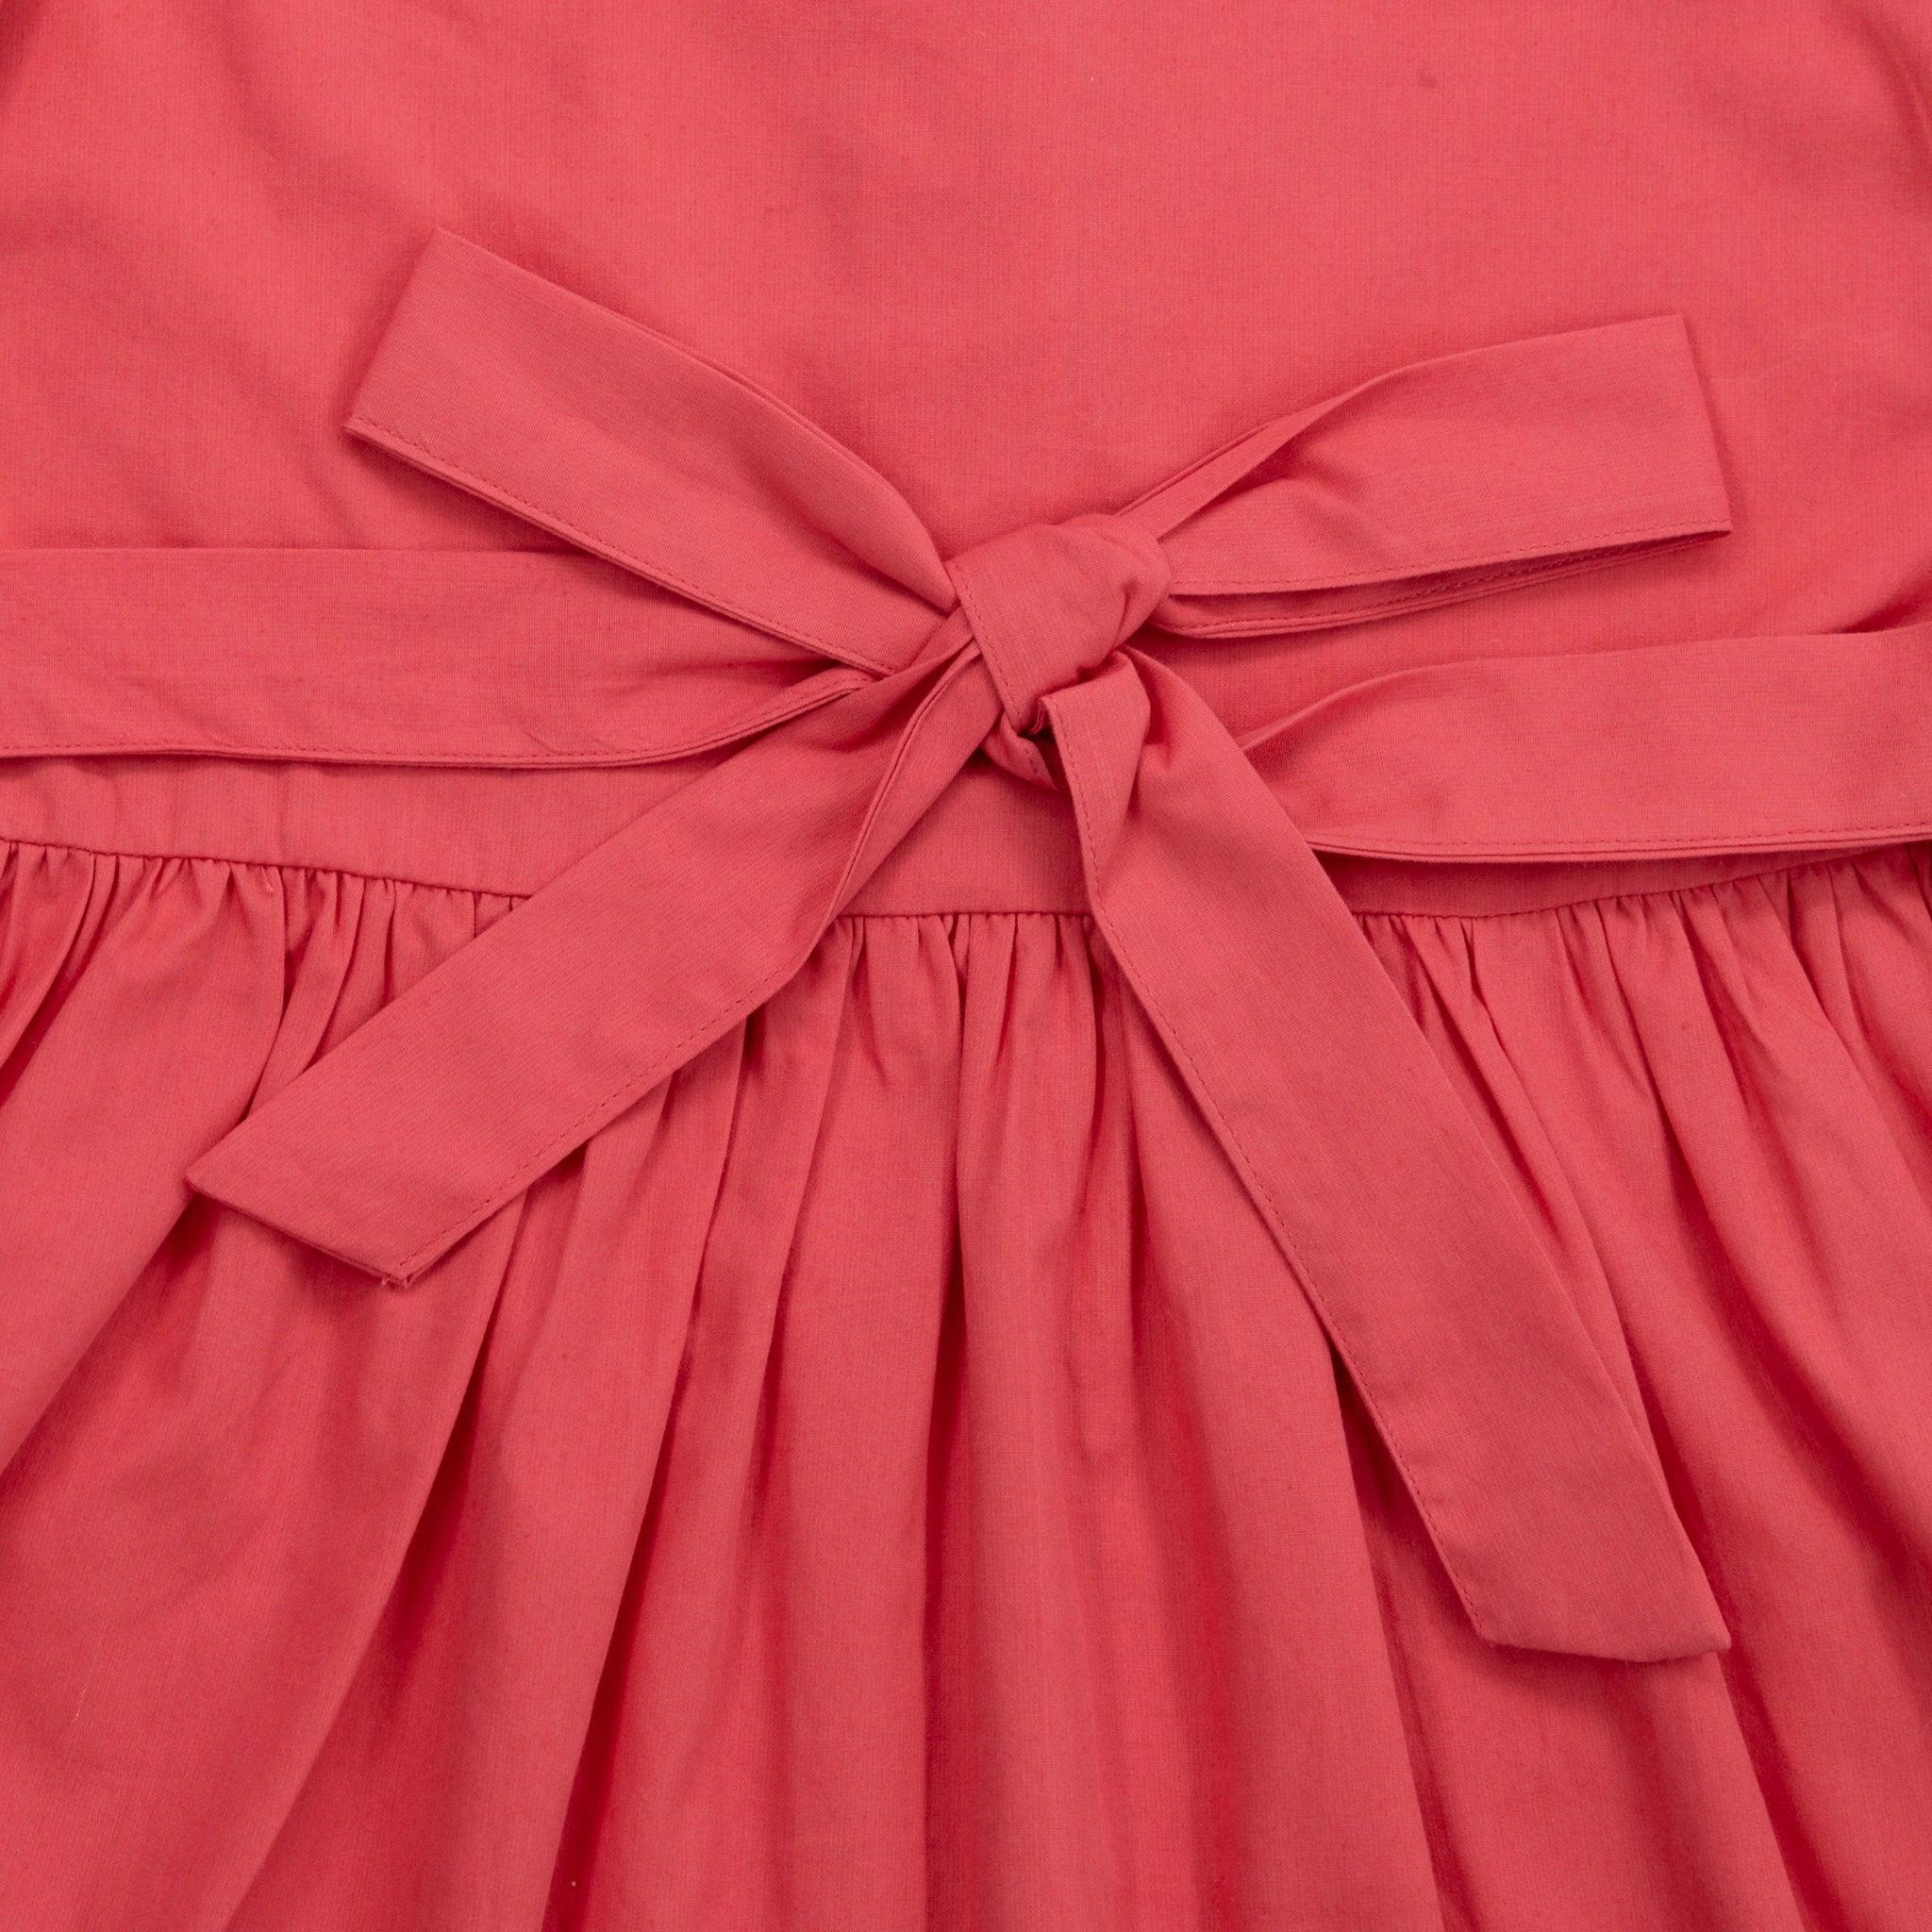 Close-up of a coral pink fabric with a decorative bow and gathered pleats on a Karee red long puff sleeve cotton dress.